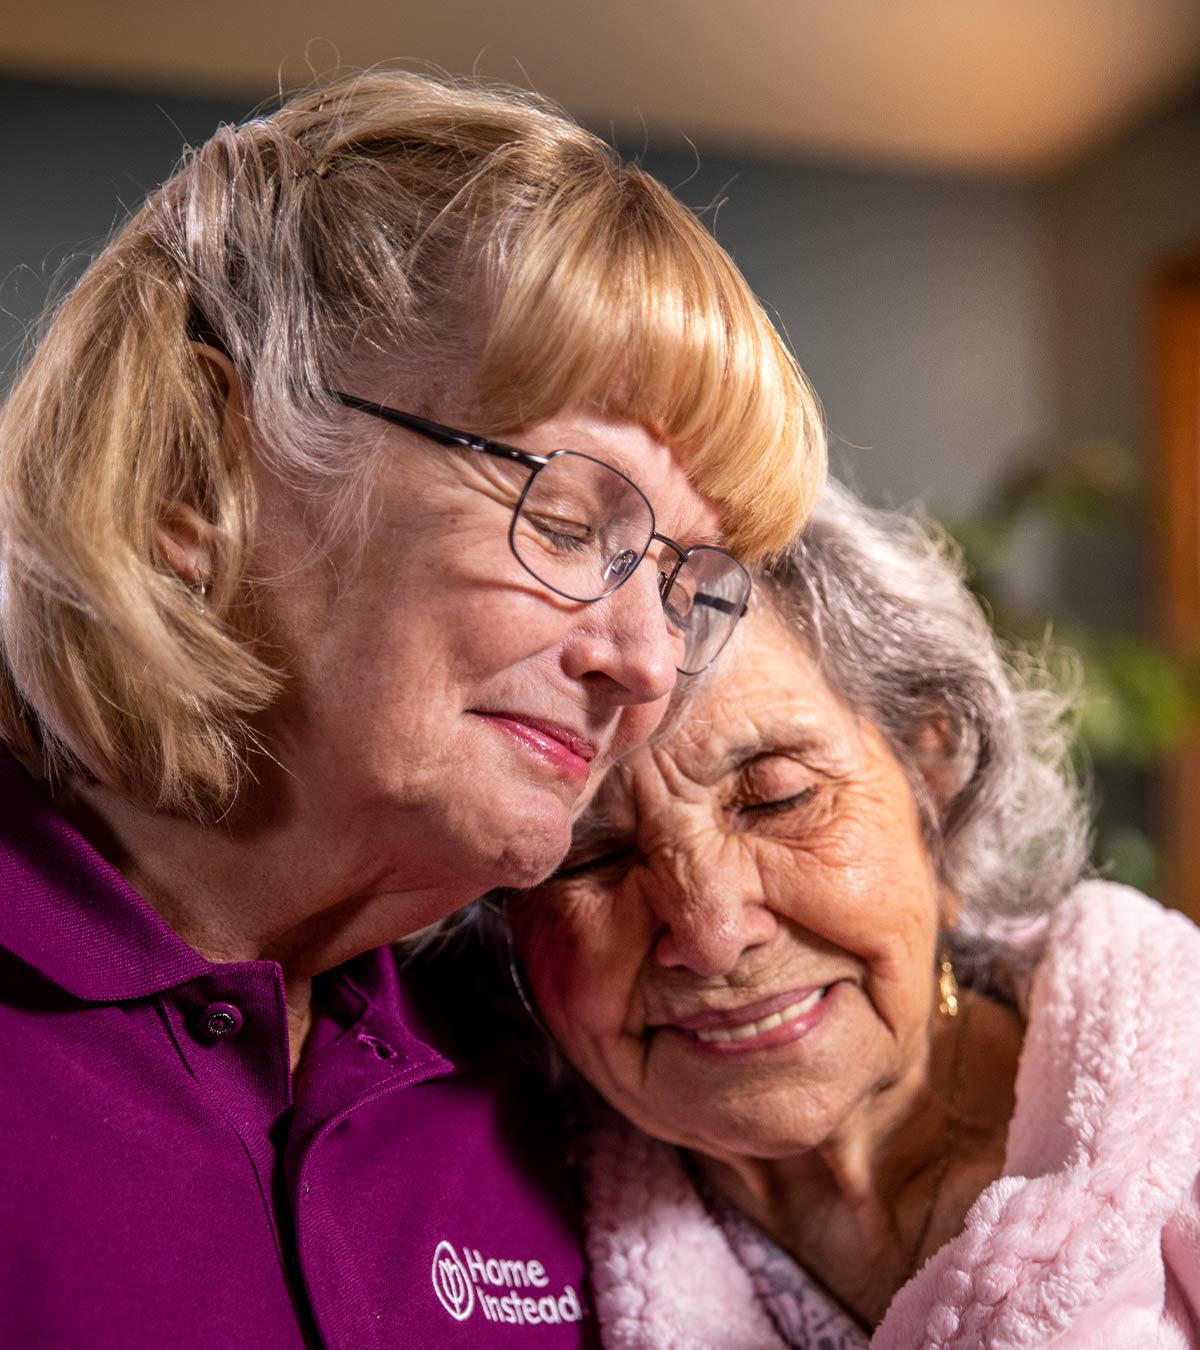 CAREGiver providing in-home senior care services. Home Instead of Missoula, MT provides Elder Care to aging adults. 